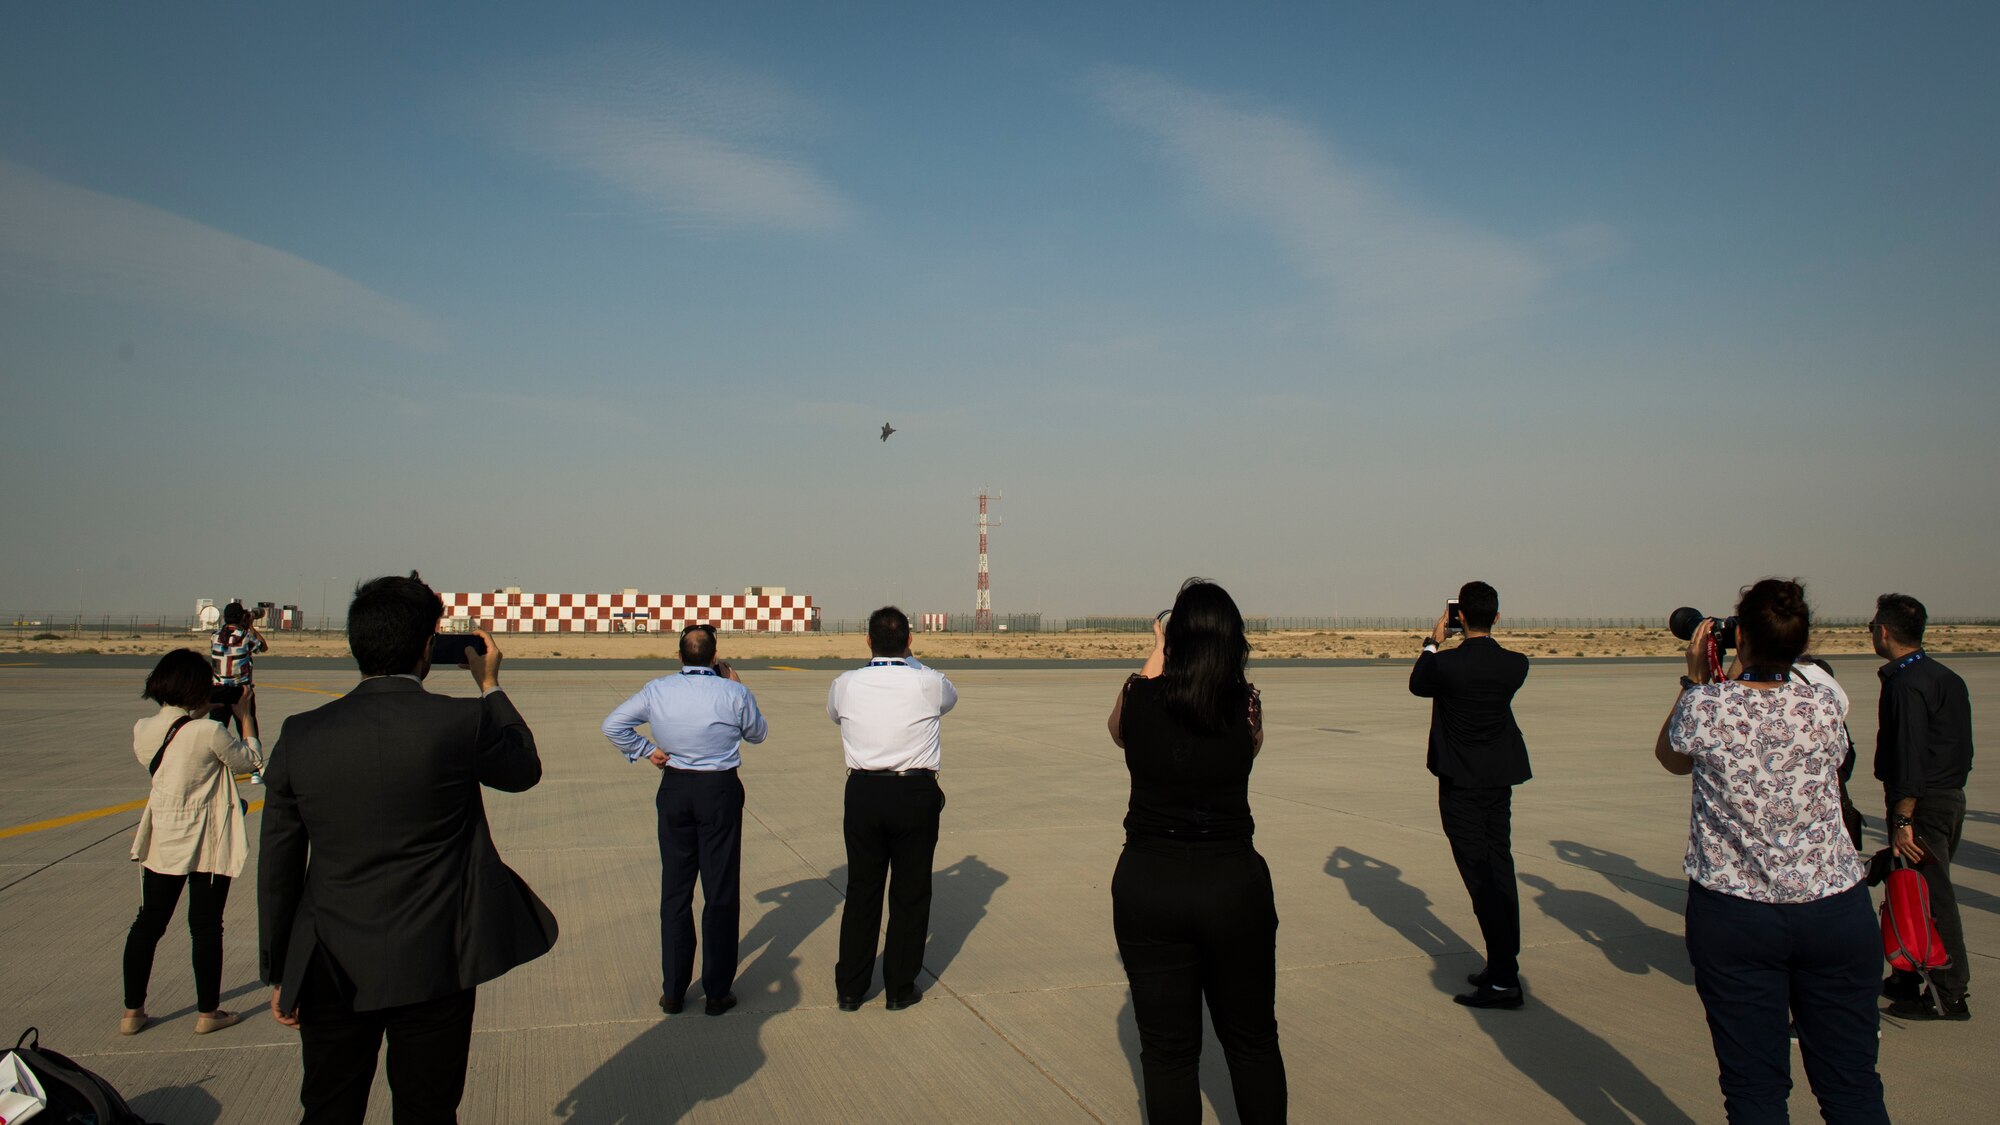 Spectators look on as a U.S. Air Force F-22 Raptor performs an aerial demonstration at the Dubai Airshow, Nov. 19, 2019.